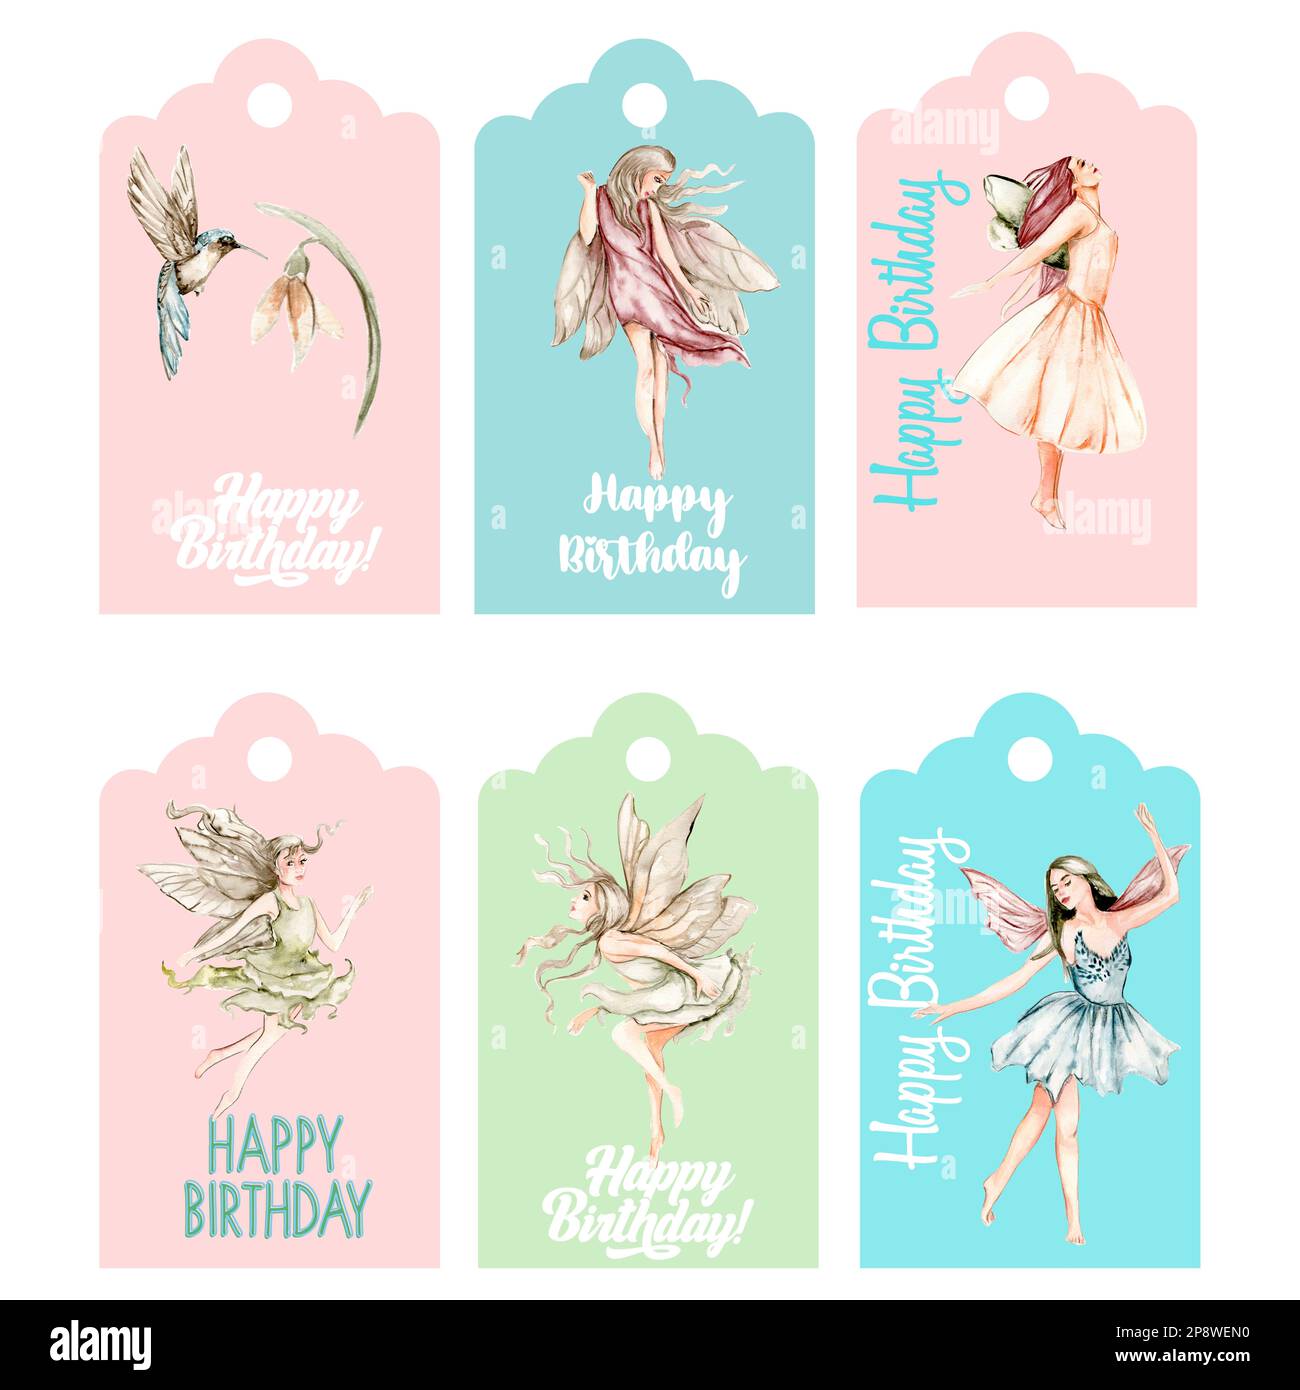 Set of happy birthday  tags. Illustration isolated on white background. Watercolor illustration fayry tales.Template label set.Wedding cake design. Stock Photo